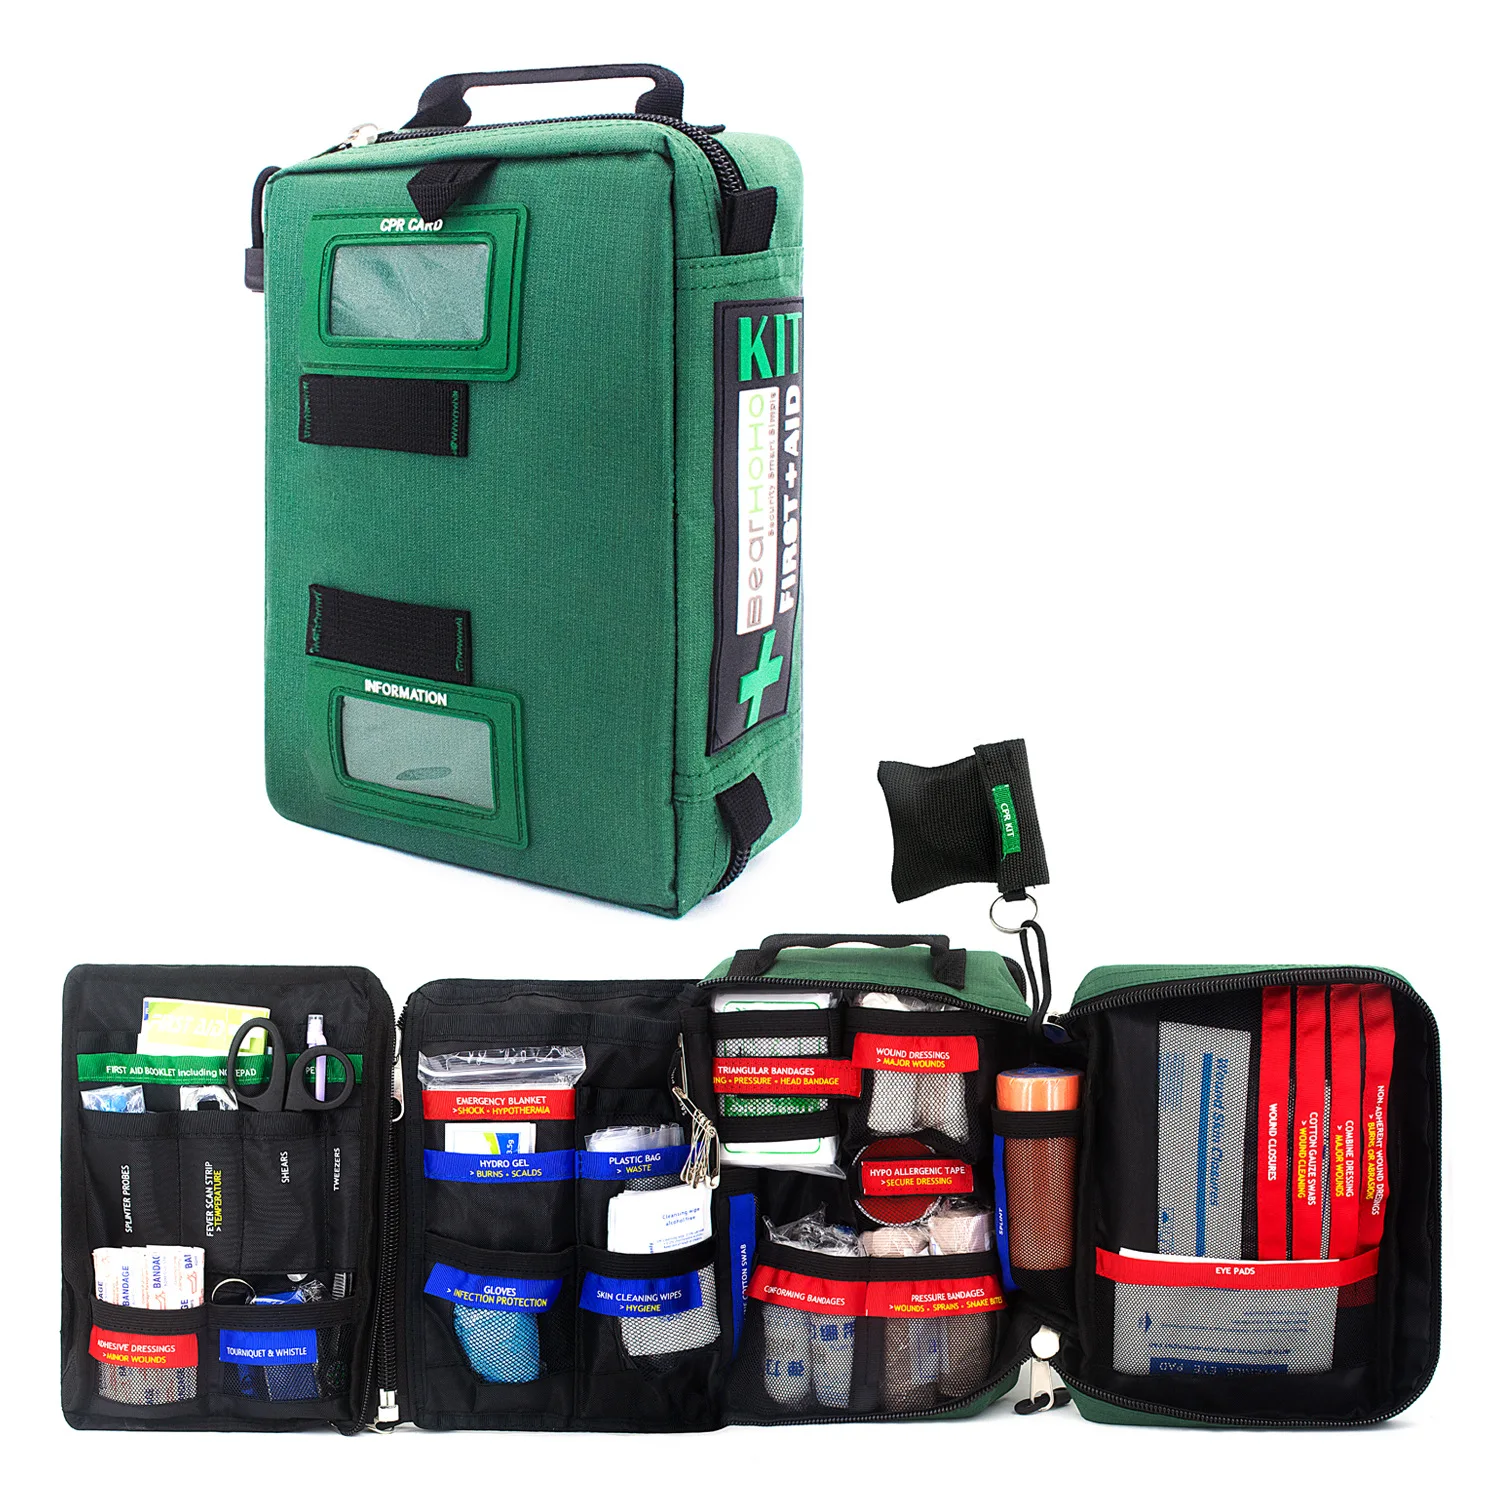 

255Pcs Handy First Aid Kit Lightweight Emergency Medical Rescue Bags For Home Outdoors Car Travel School Hiking Safety Survival